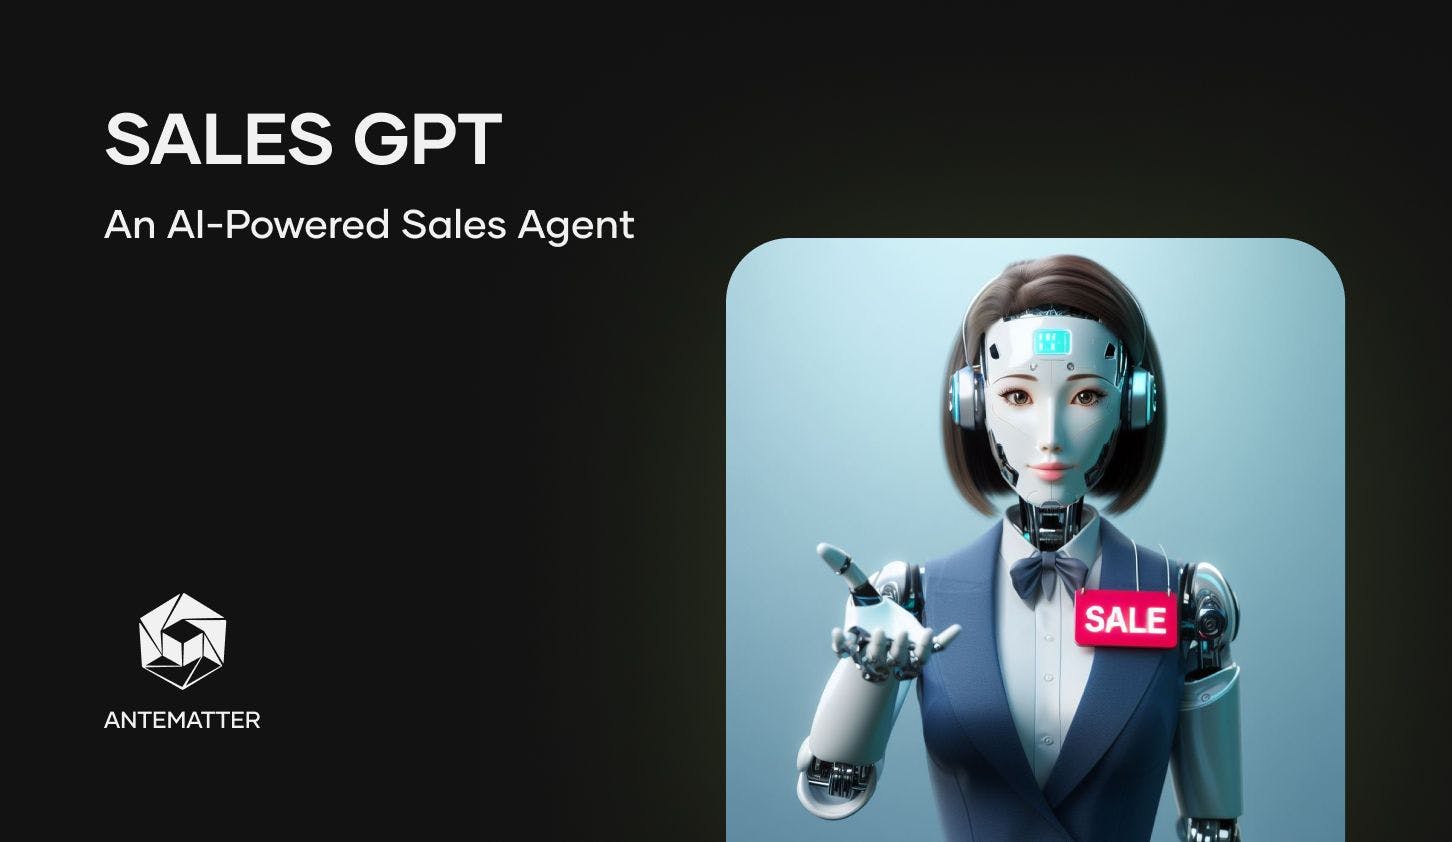 Revolutionizing Sales with Sales GPT: An AI-powered Sales Agent